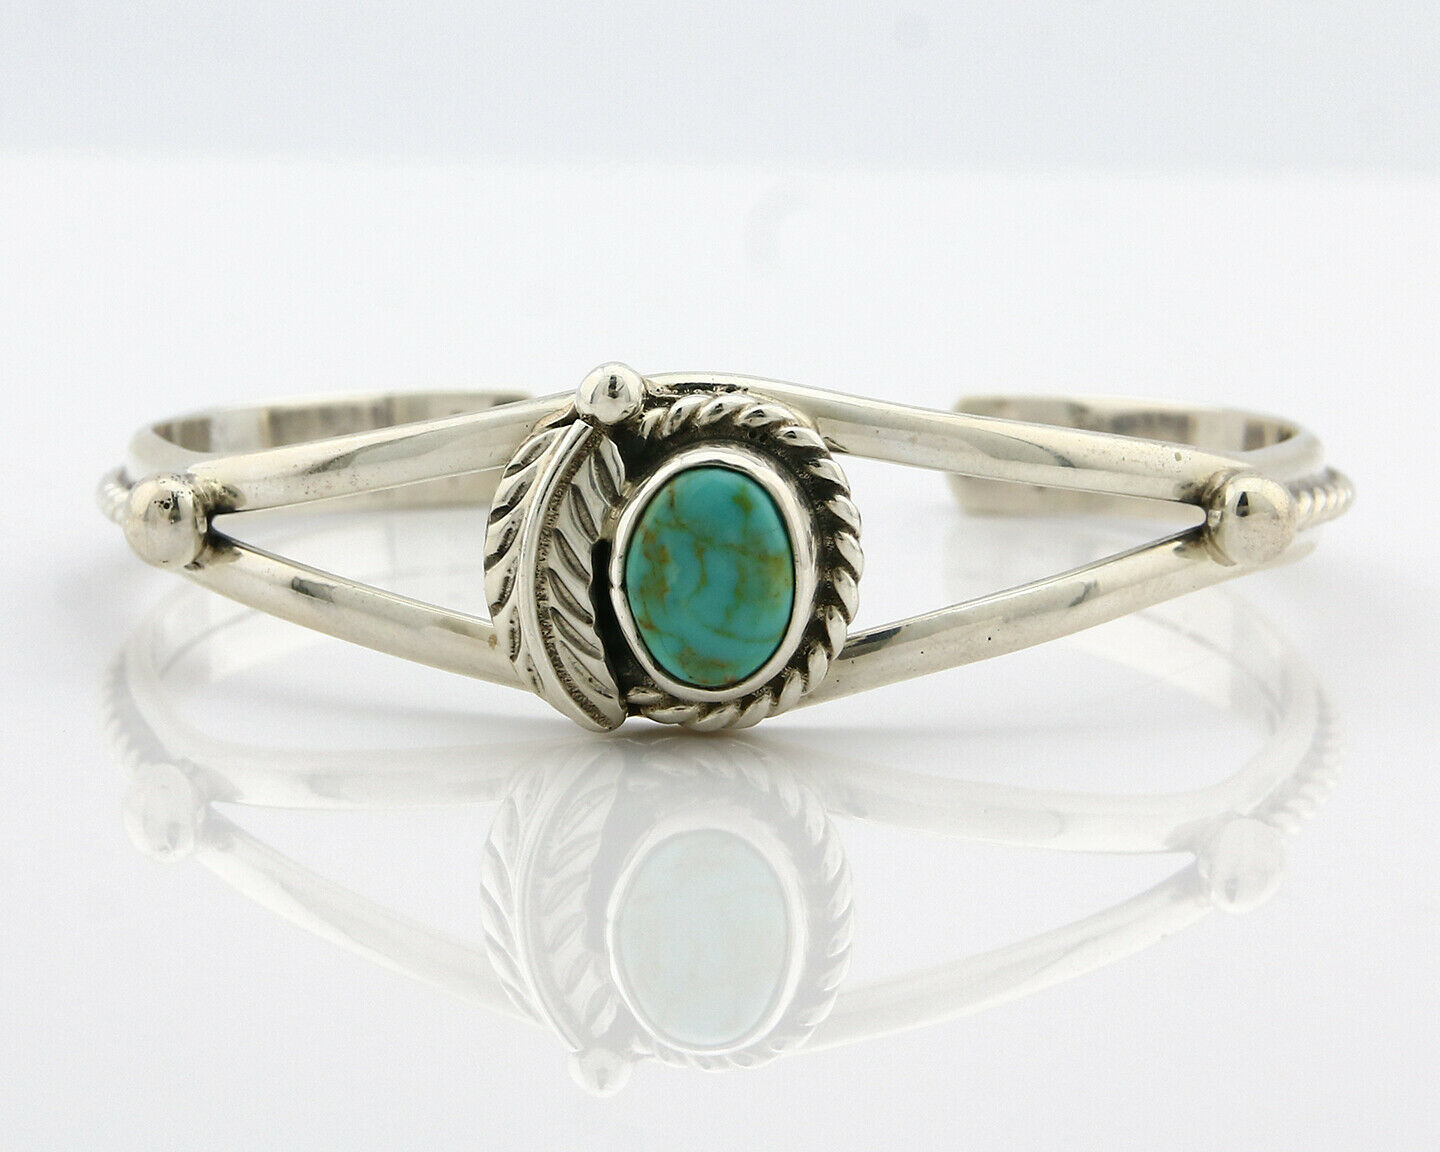 Navajo Bracelet .925 Silver Turquoise Mountain Signed Calvin Peterson C.80's